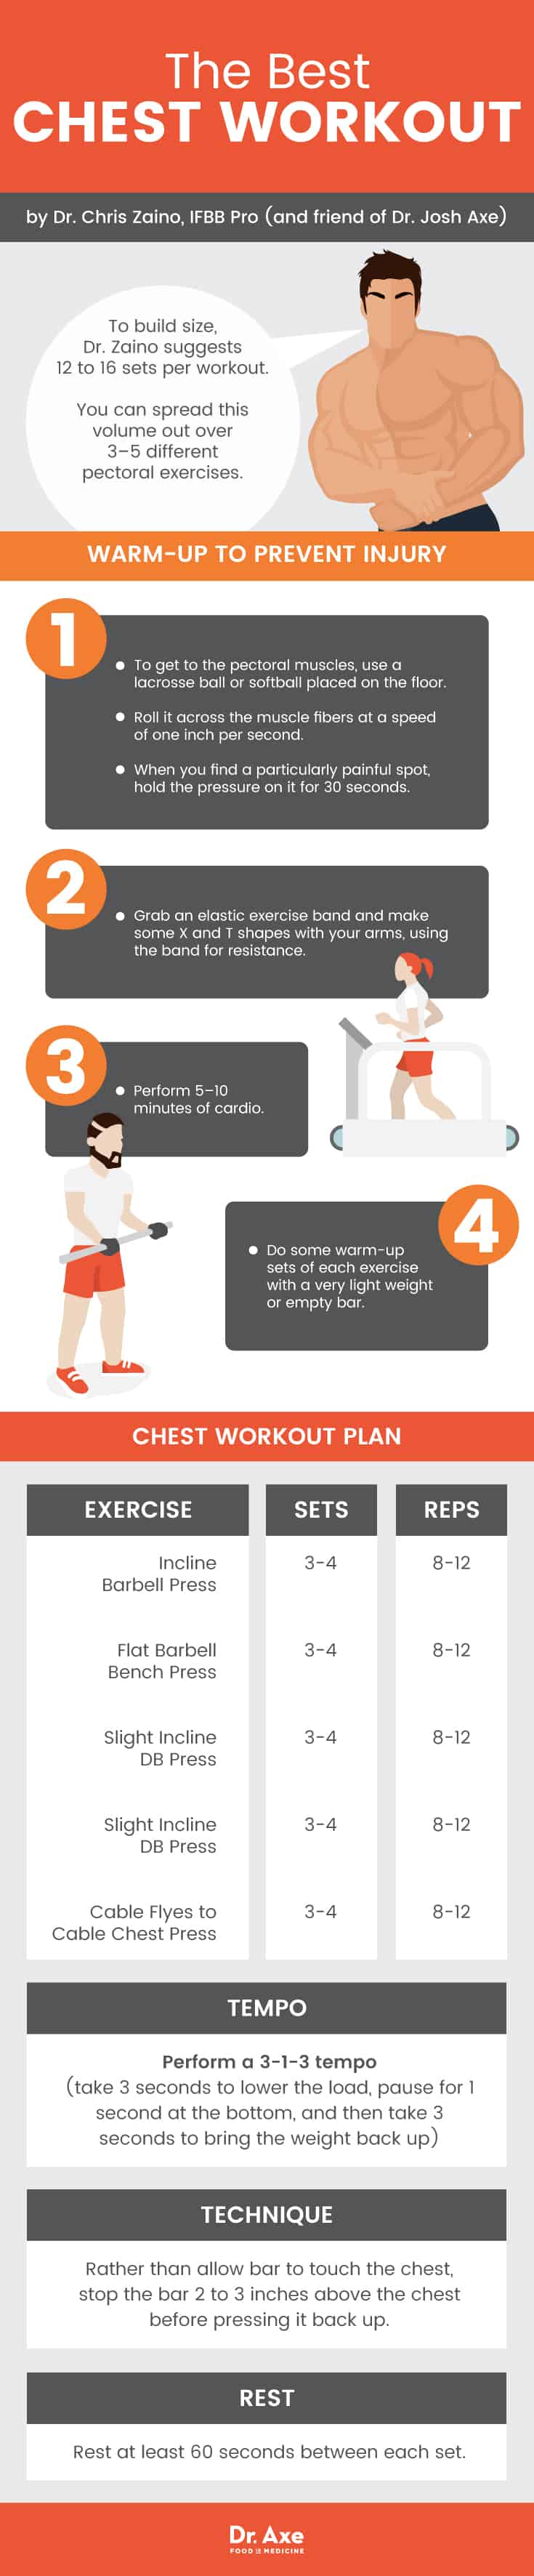 Chest workout and chest exercises - Dr. Axe